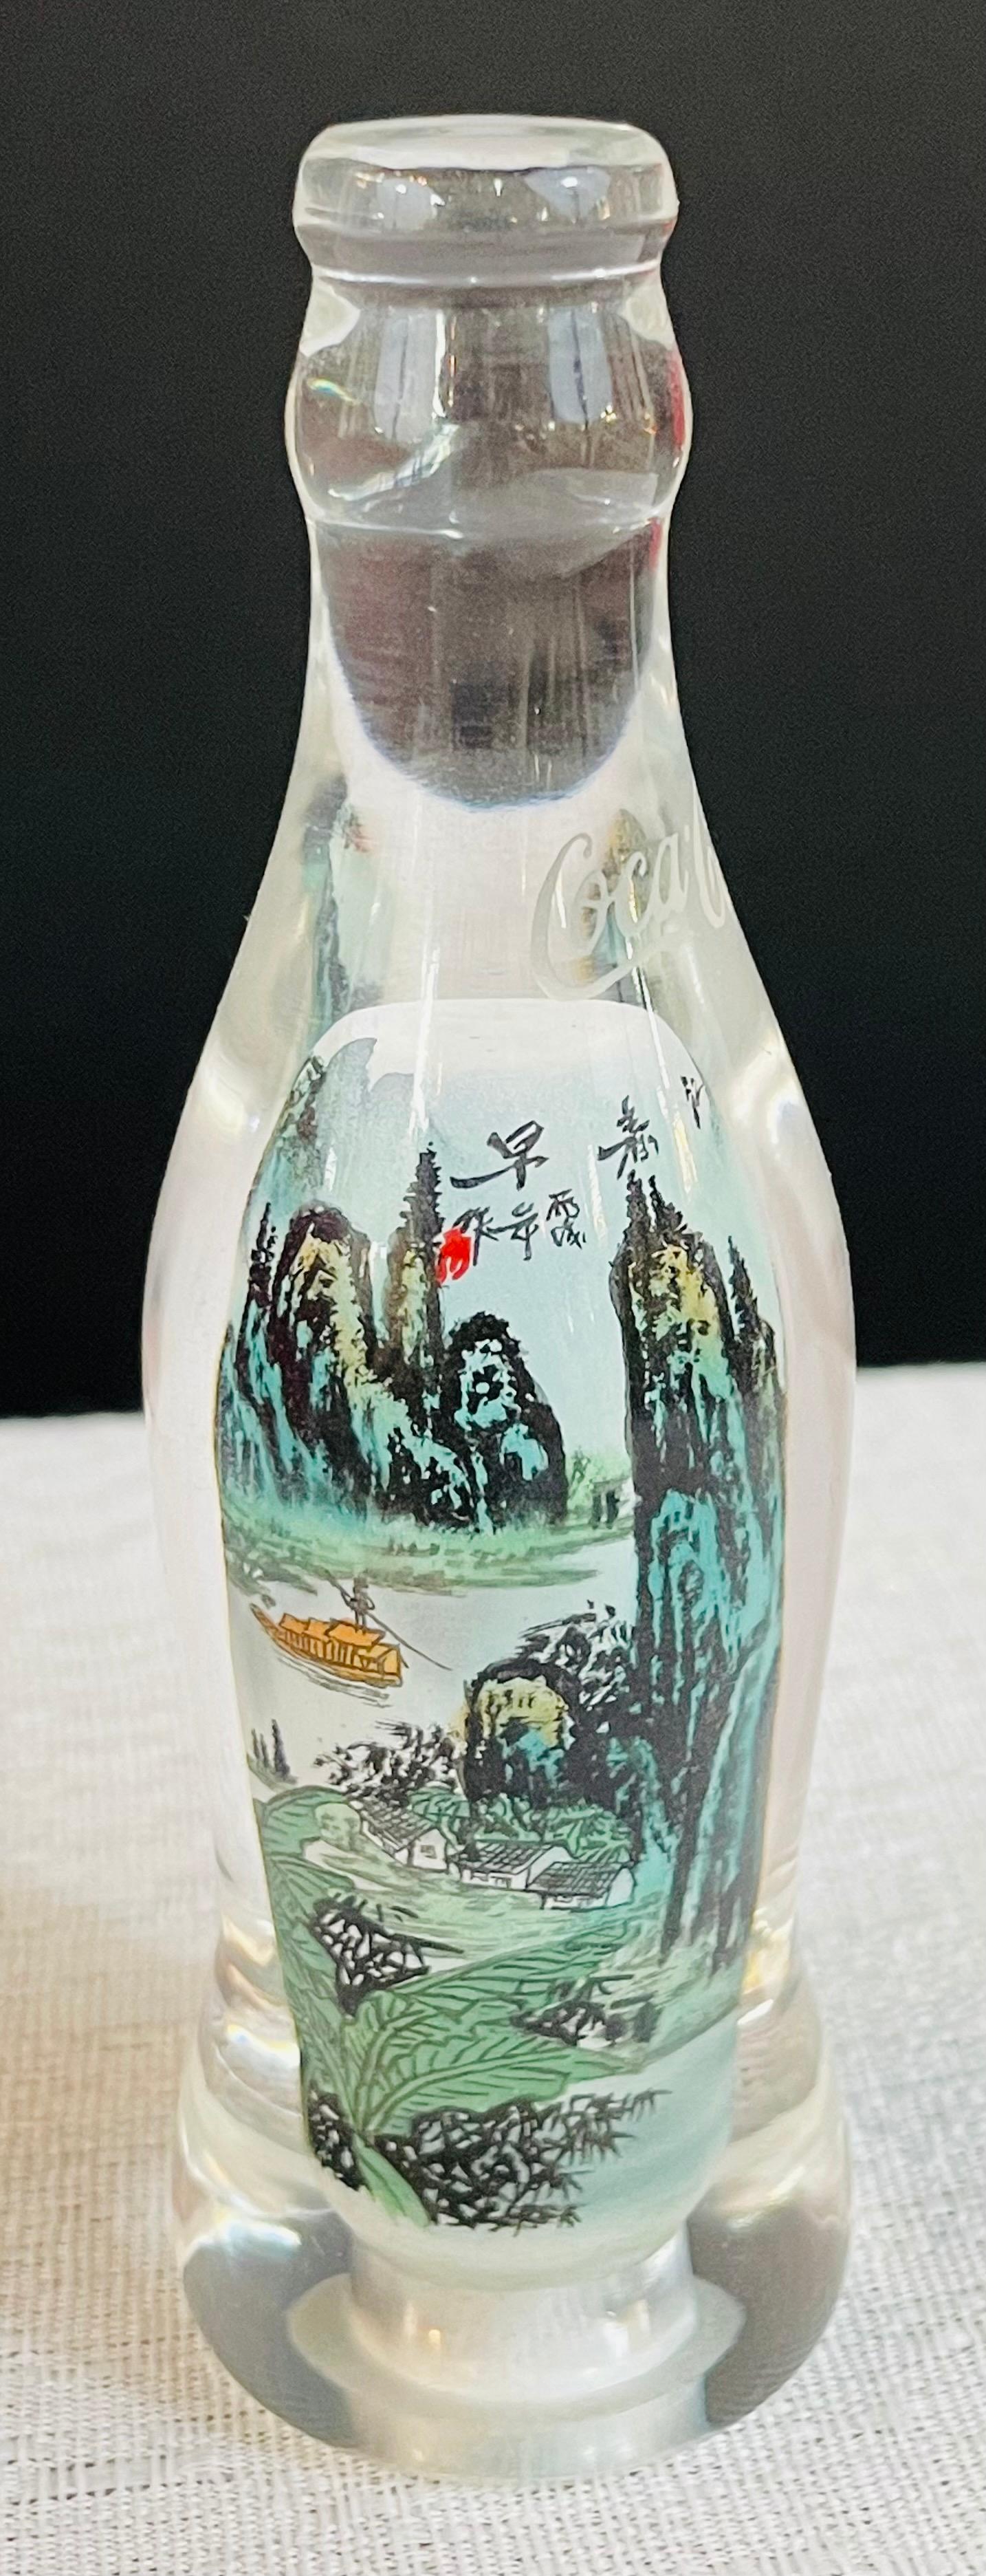 Collectible Coca-Cola Special Edition Asian Chinese Bottles, a Set of 5 For Sale 8